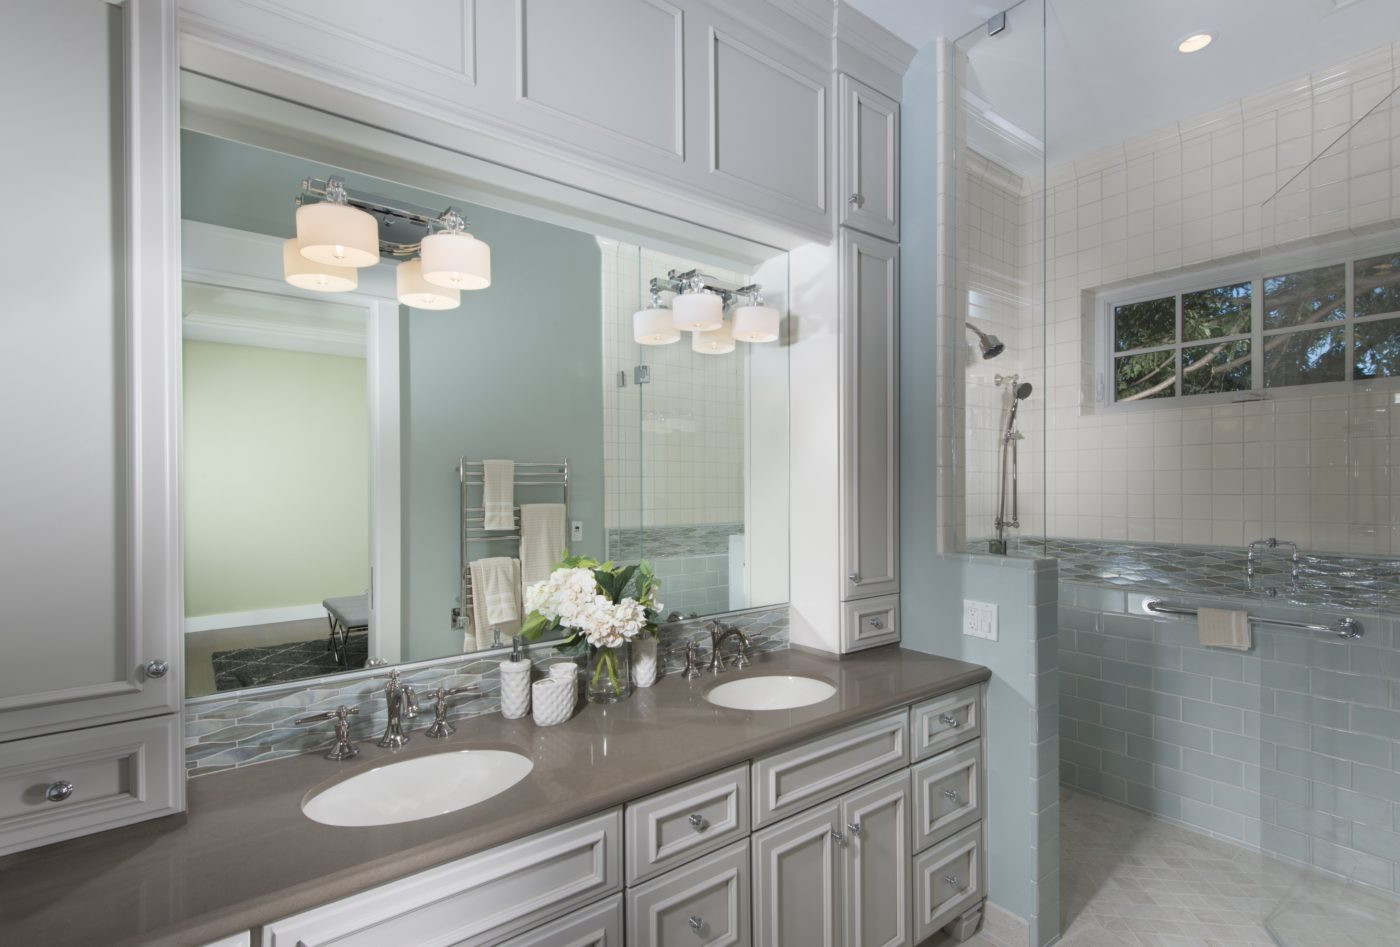 Photos Of Bathroom Remodels
 The Best Bathroom Remodeling Contractors in Silicon Valley